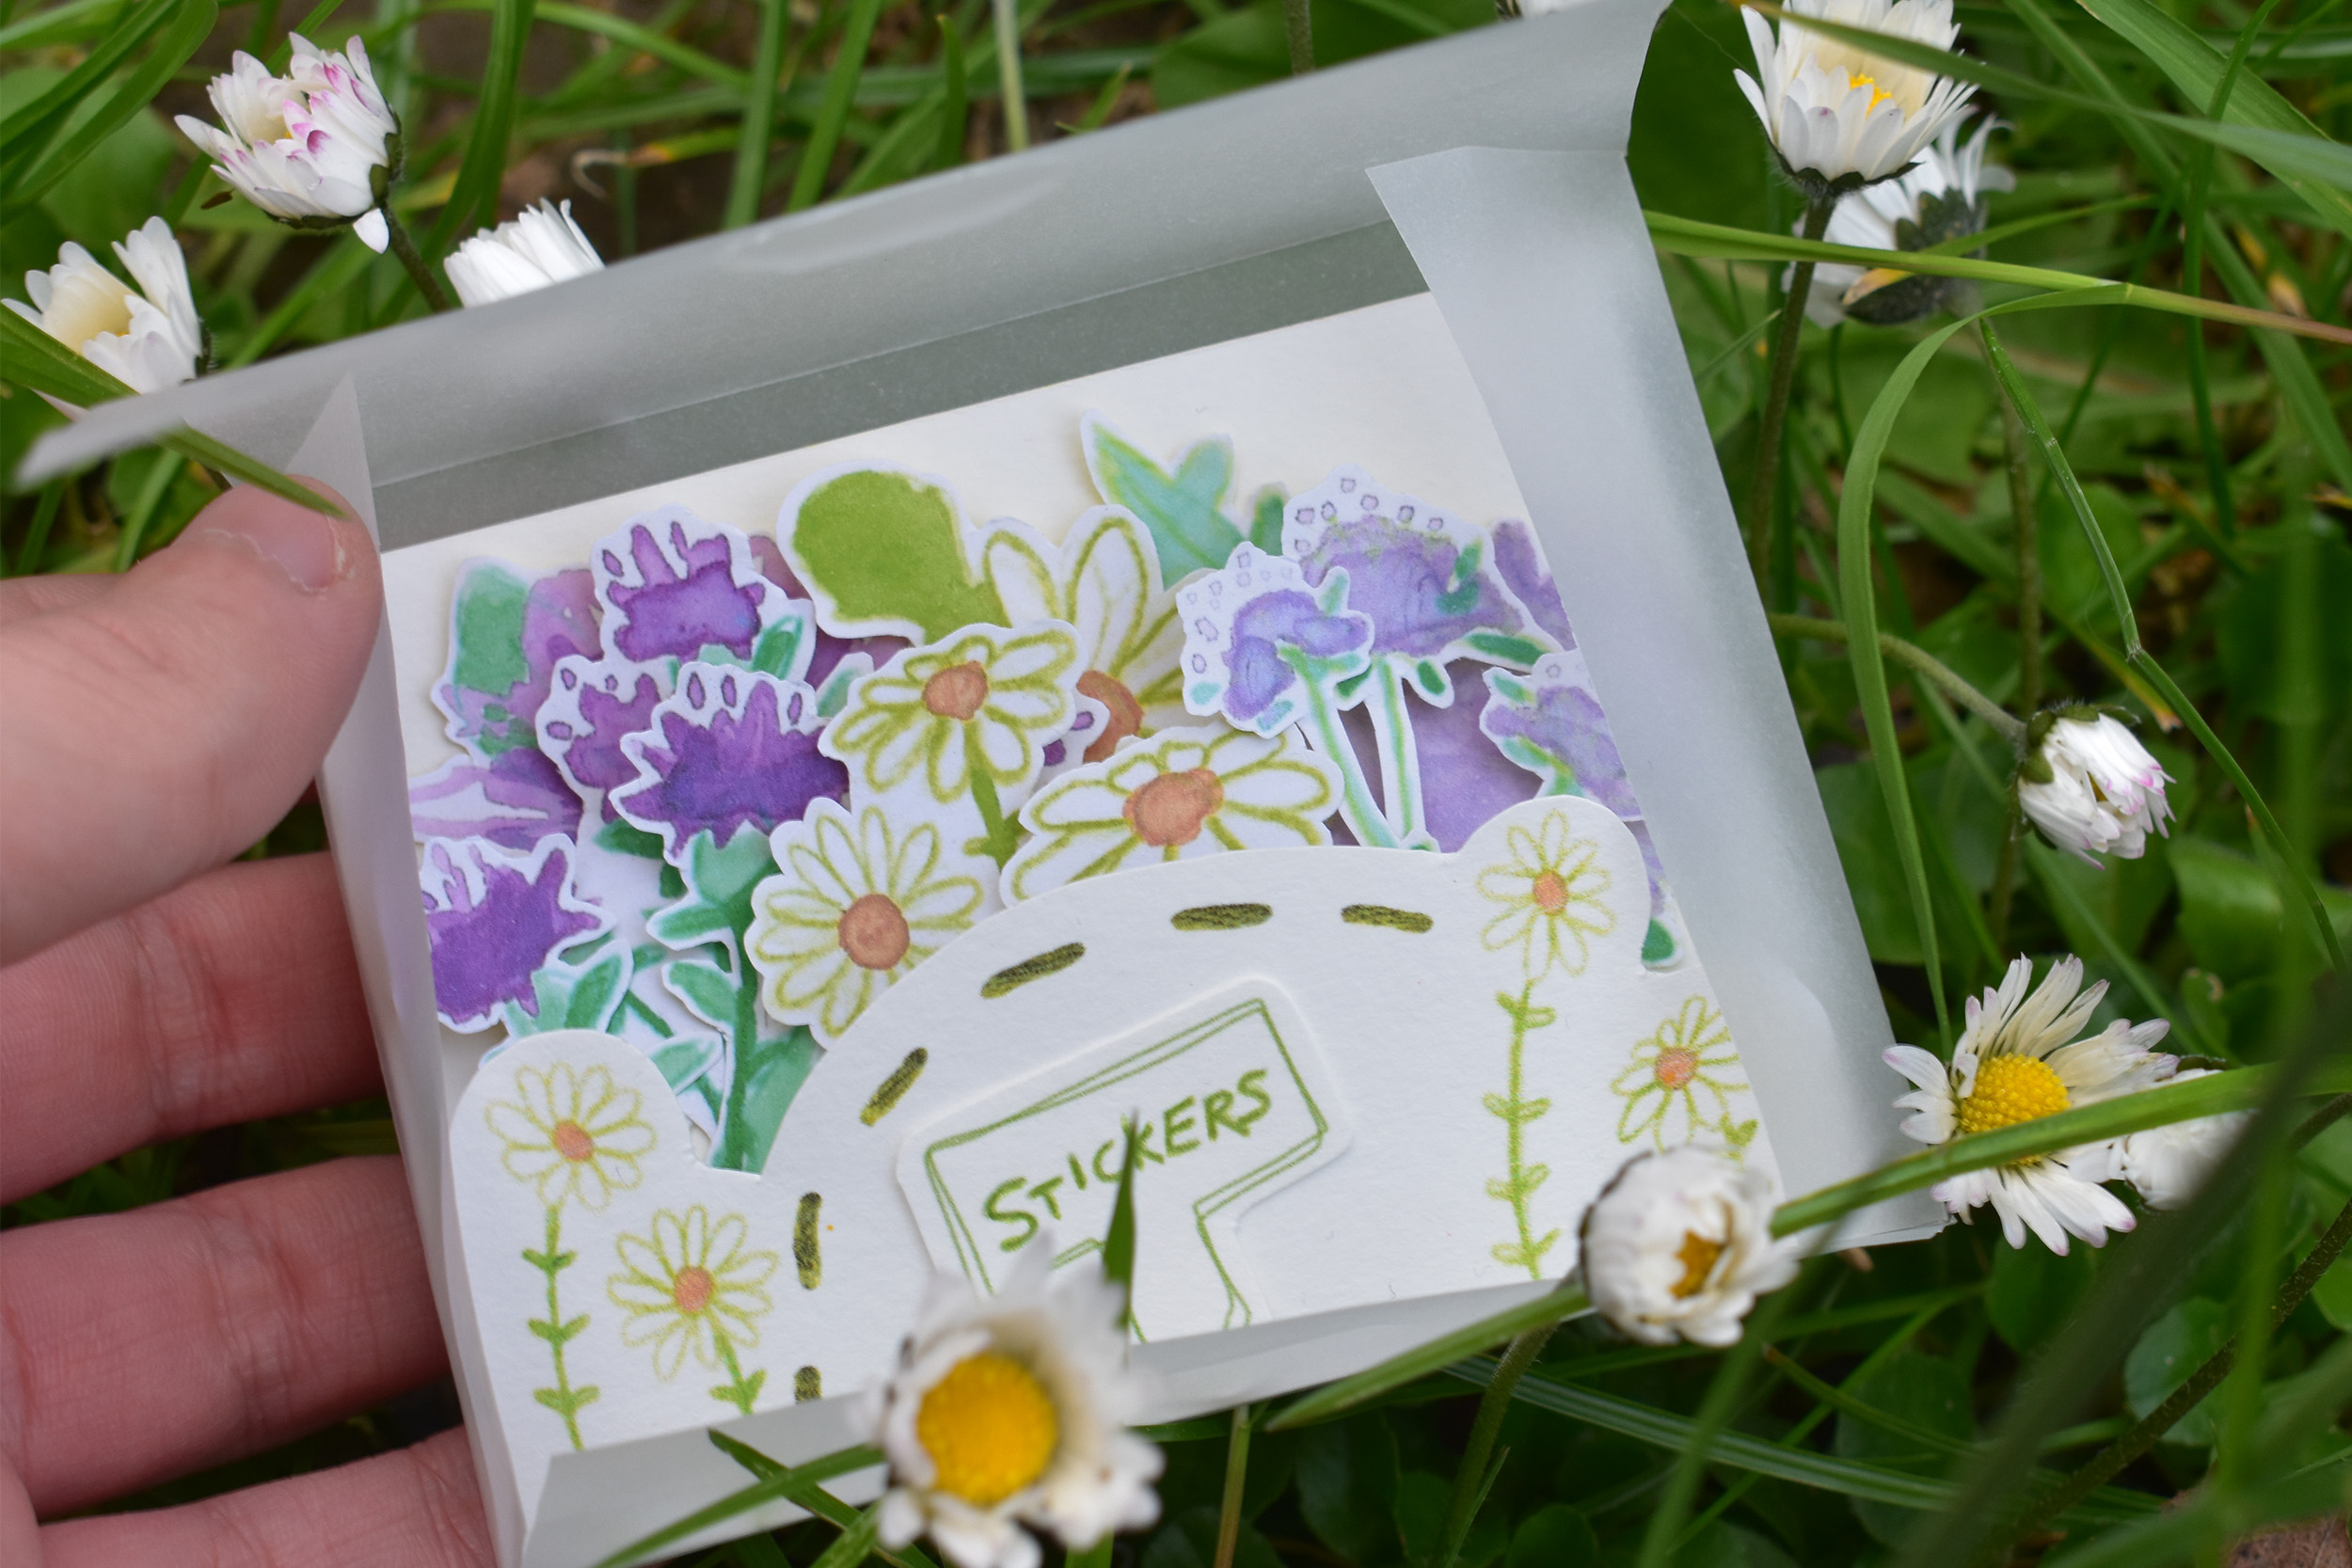 Image showing a translucent envelope containing stickers of daisies, common knapweed and field scabious. The stickers are painted in watercolour.